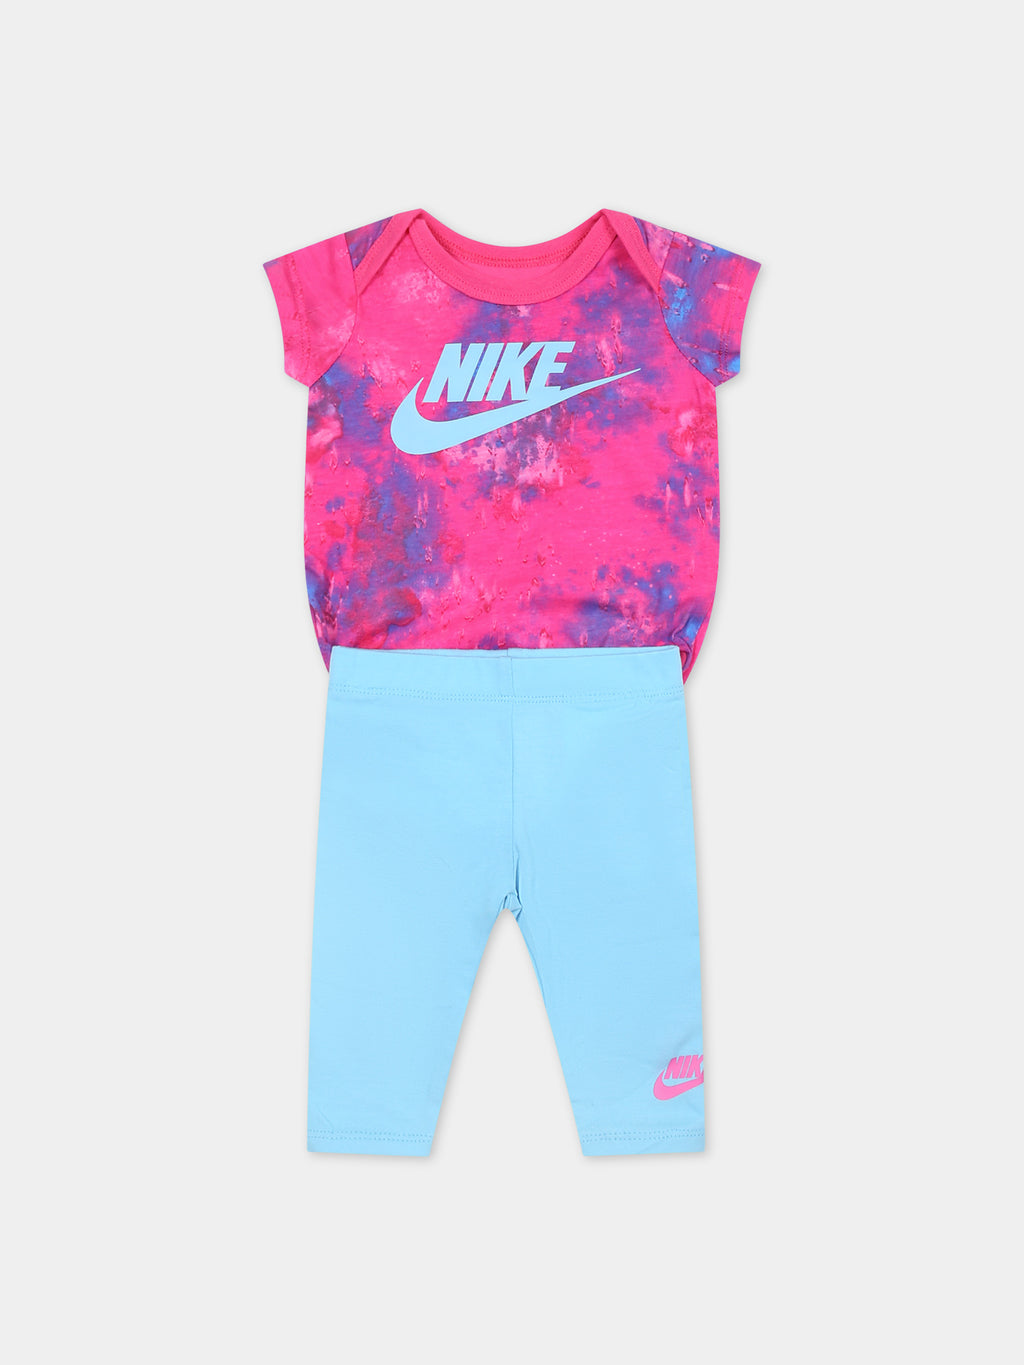 Fuchsia suit for baby girl with swoosh